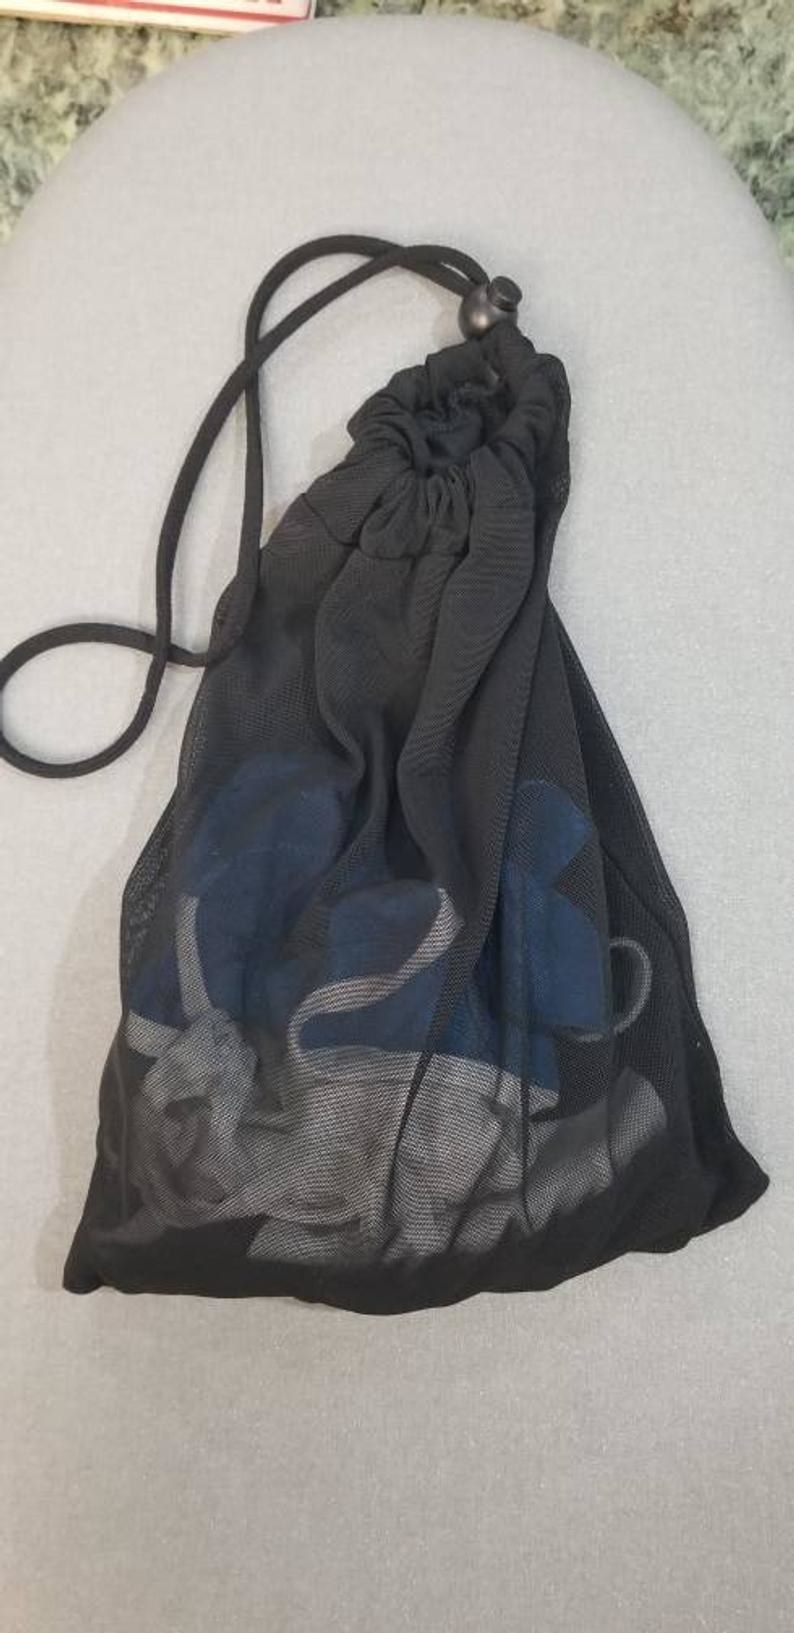 the mesh black bag with cloth face masks in it 